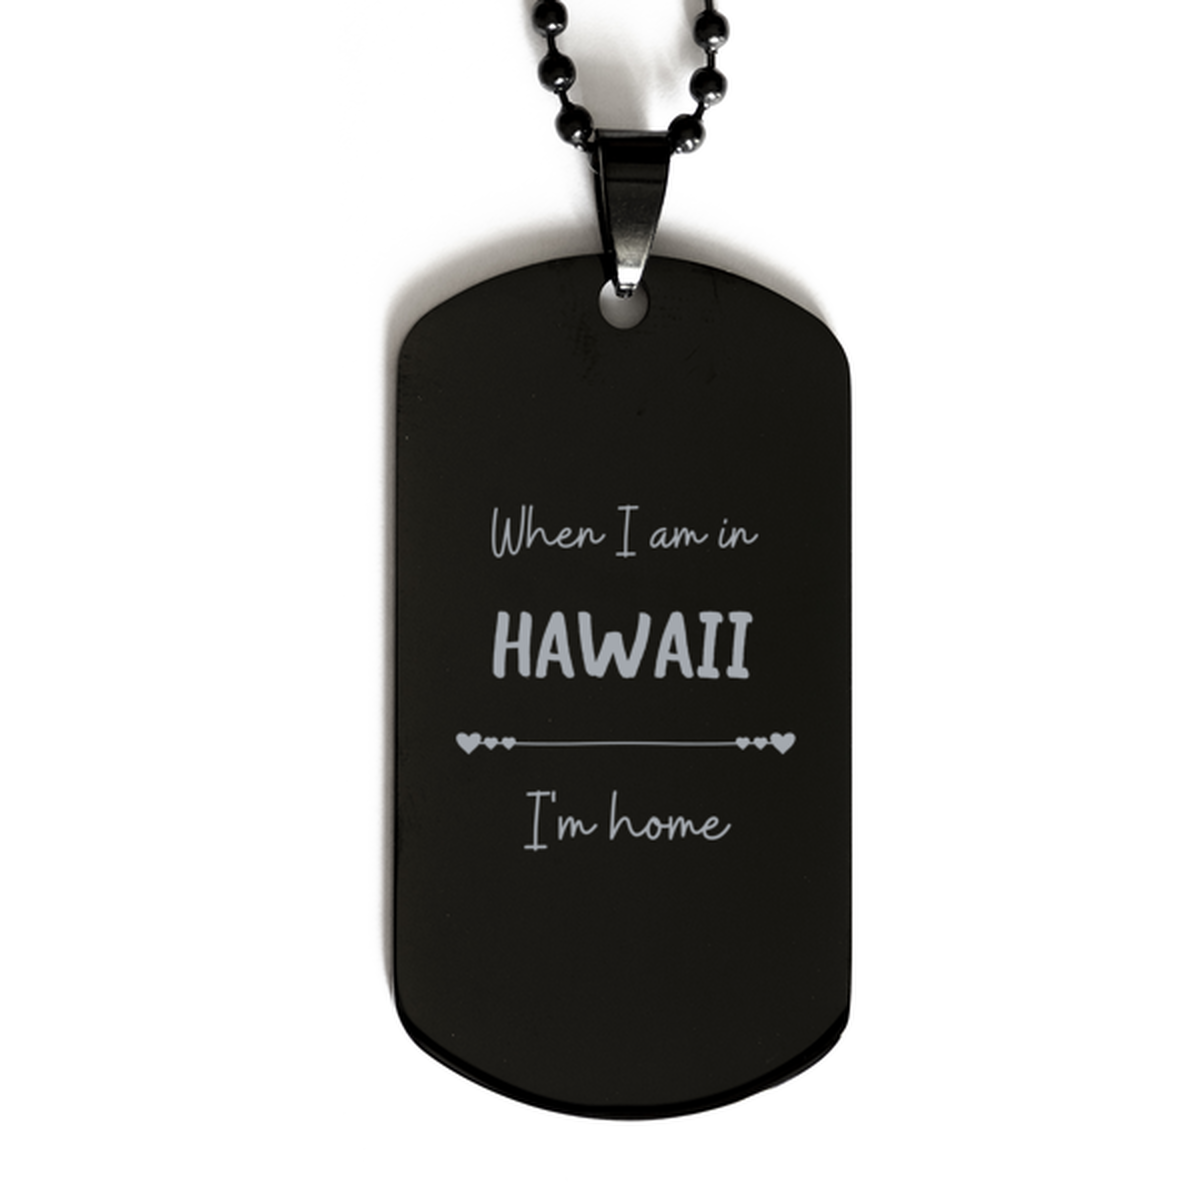 When I am in Hawaii I'm home Black Dog Tag, Cheap Gifts For Hawaii, State Hawaii Birthday Gifts for Friends Coworker